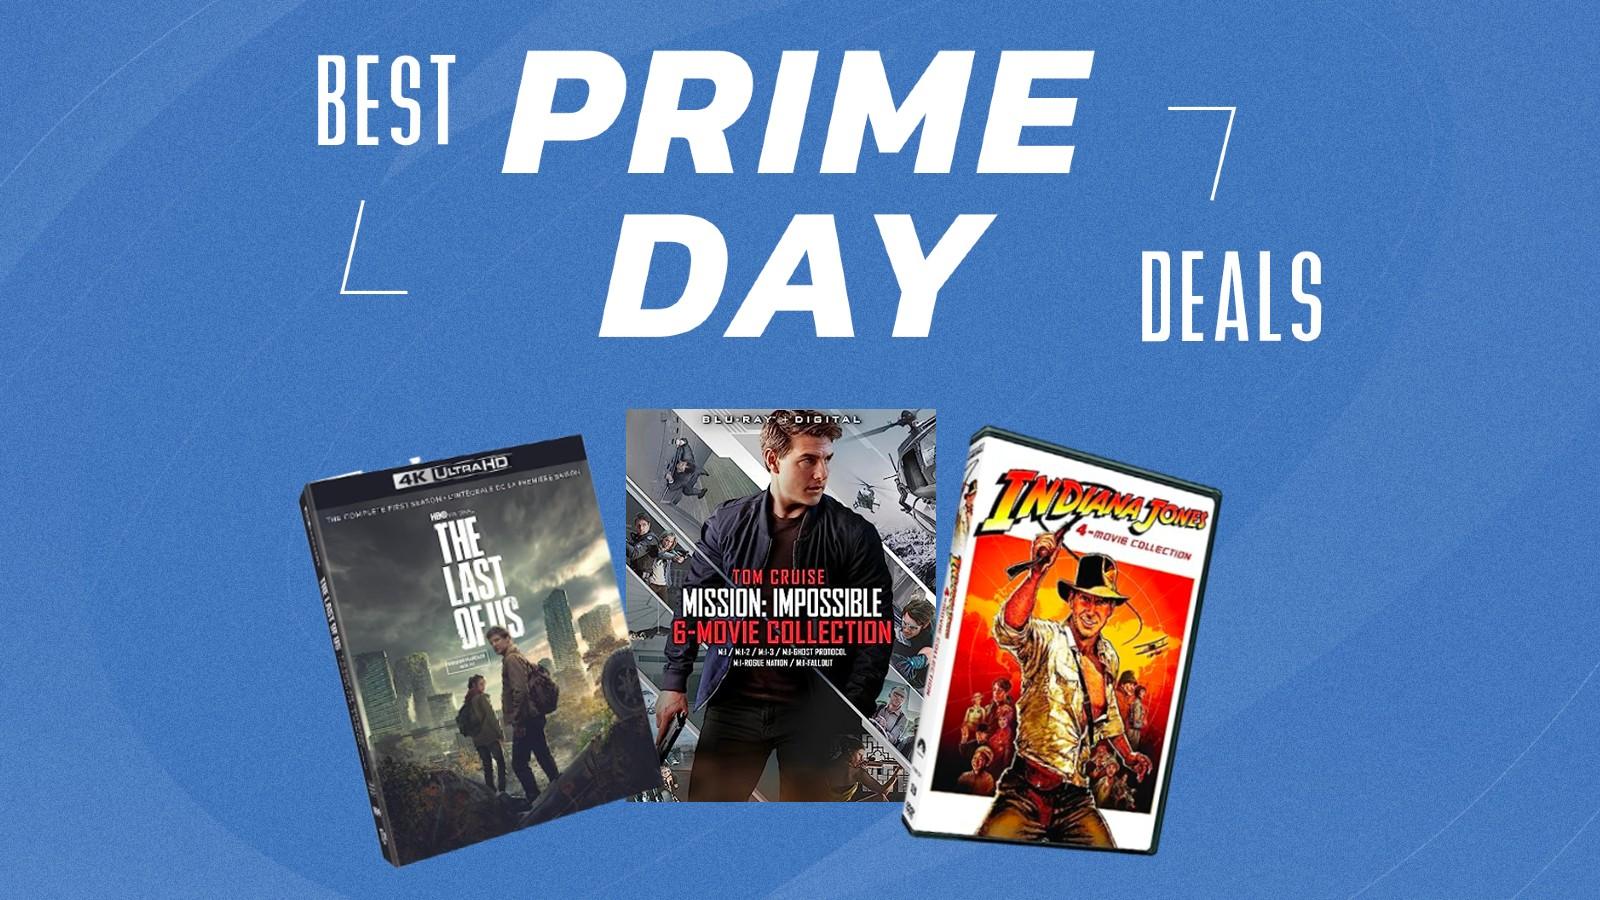 The DVD, Blu-ray, and 4K Ultra HD covers for The Last of Us, Mission: Impossible, and Indiana Jones, some of the best Prime Day movie deals